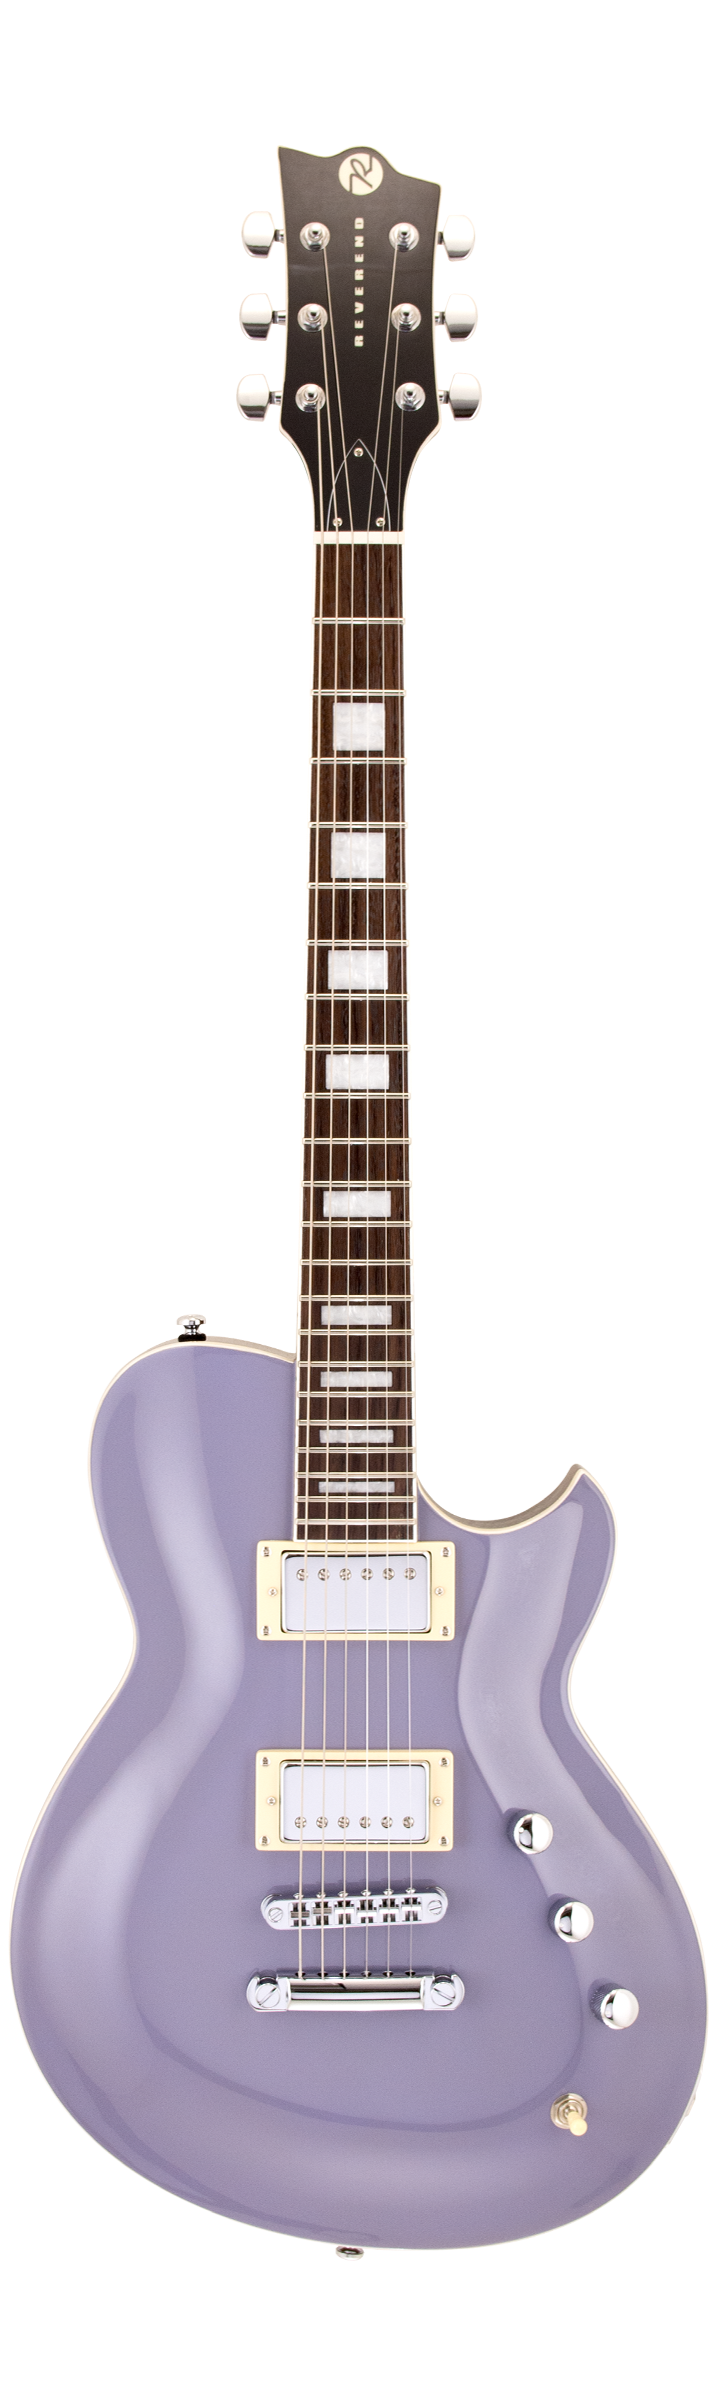 Reverend ROUNDHOUSE Electric Guitar (Periwinkle)